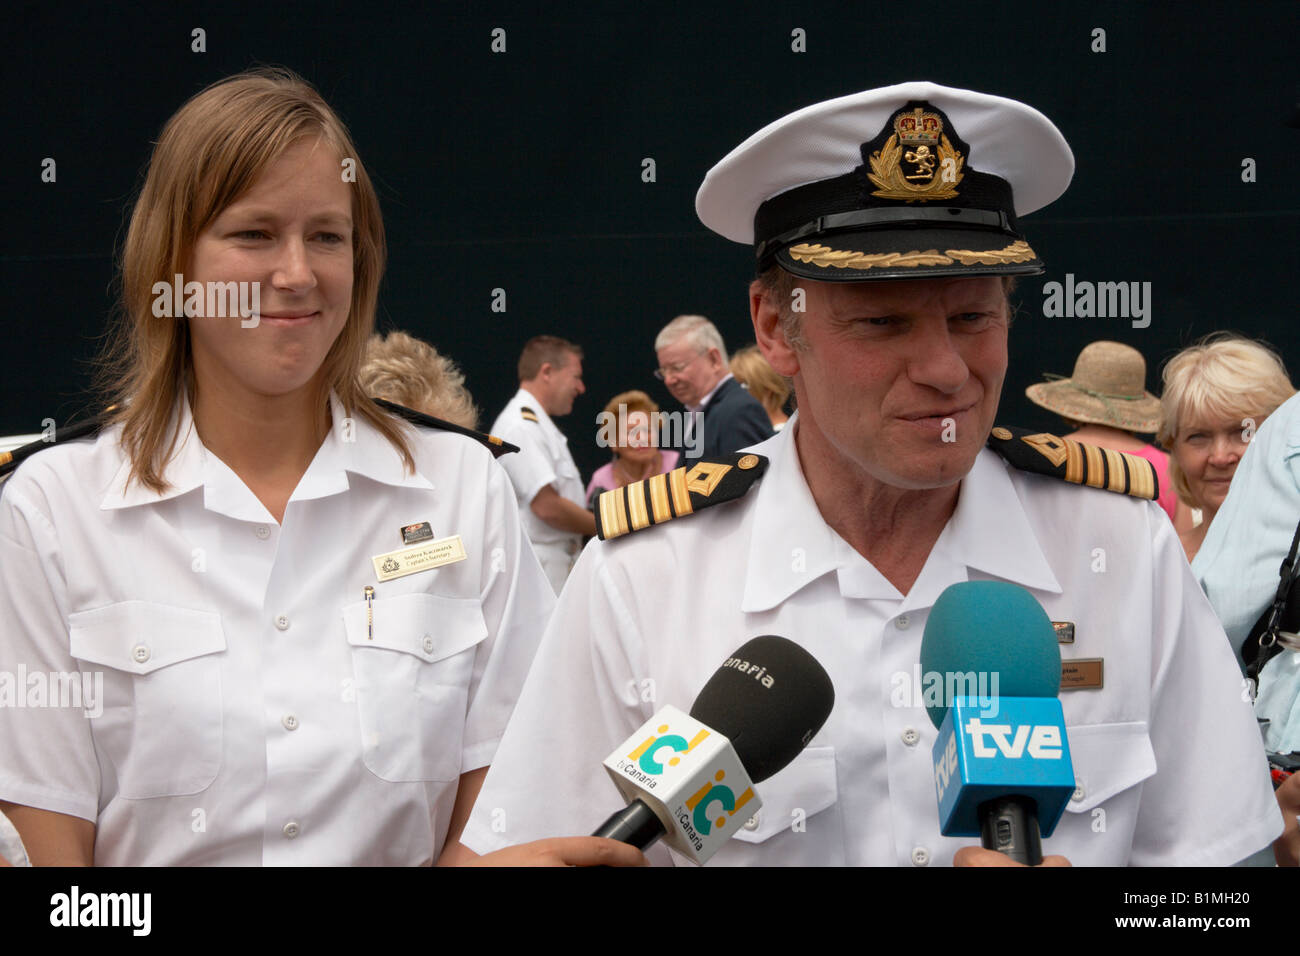 Page 3 - Qe2 Cunard High Resolution Stock Photography and Images - Alamy